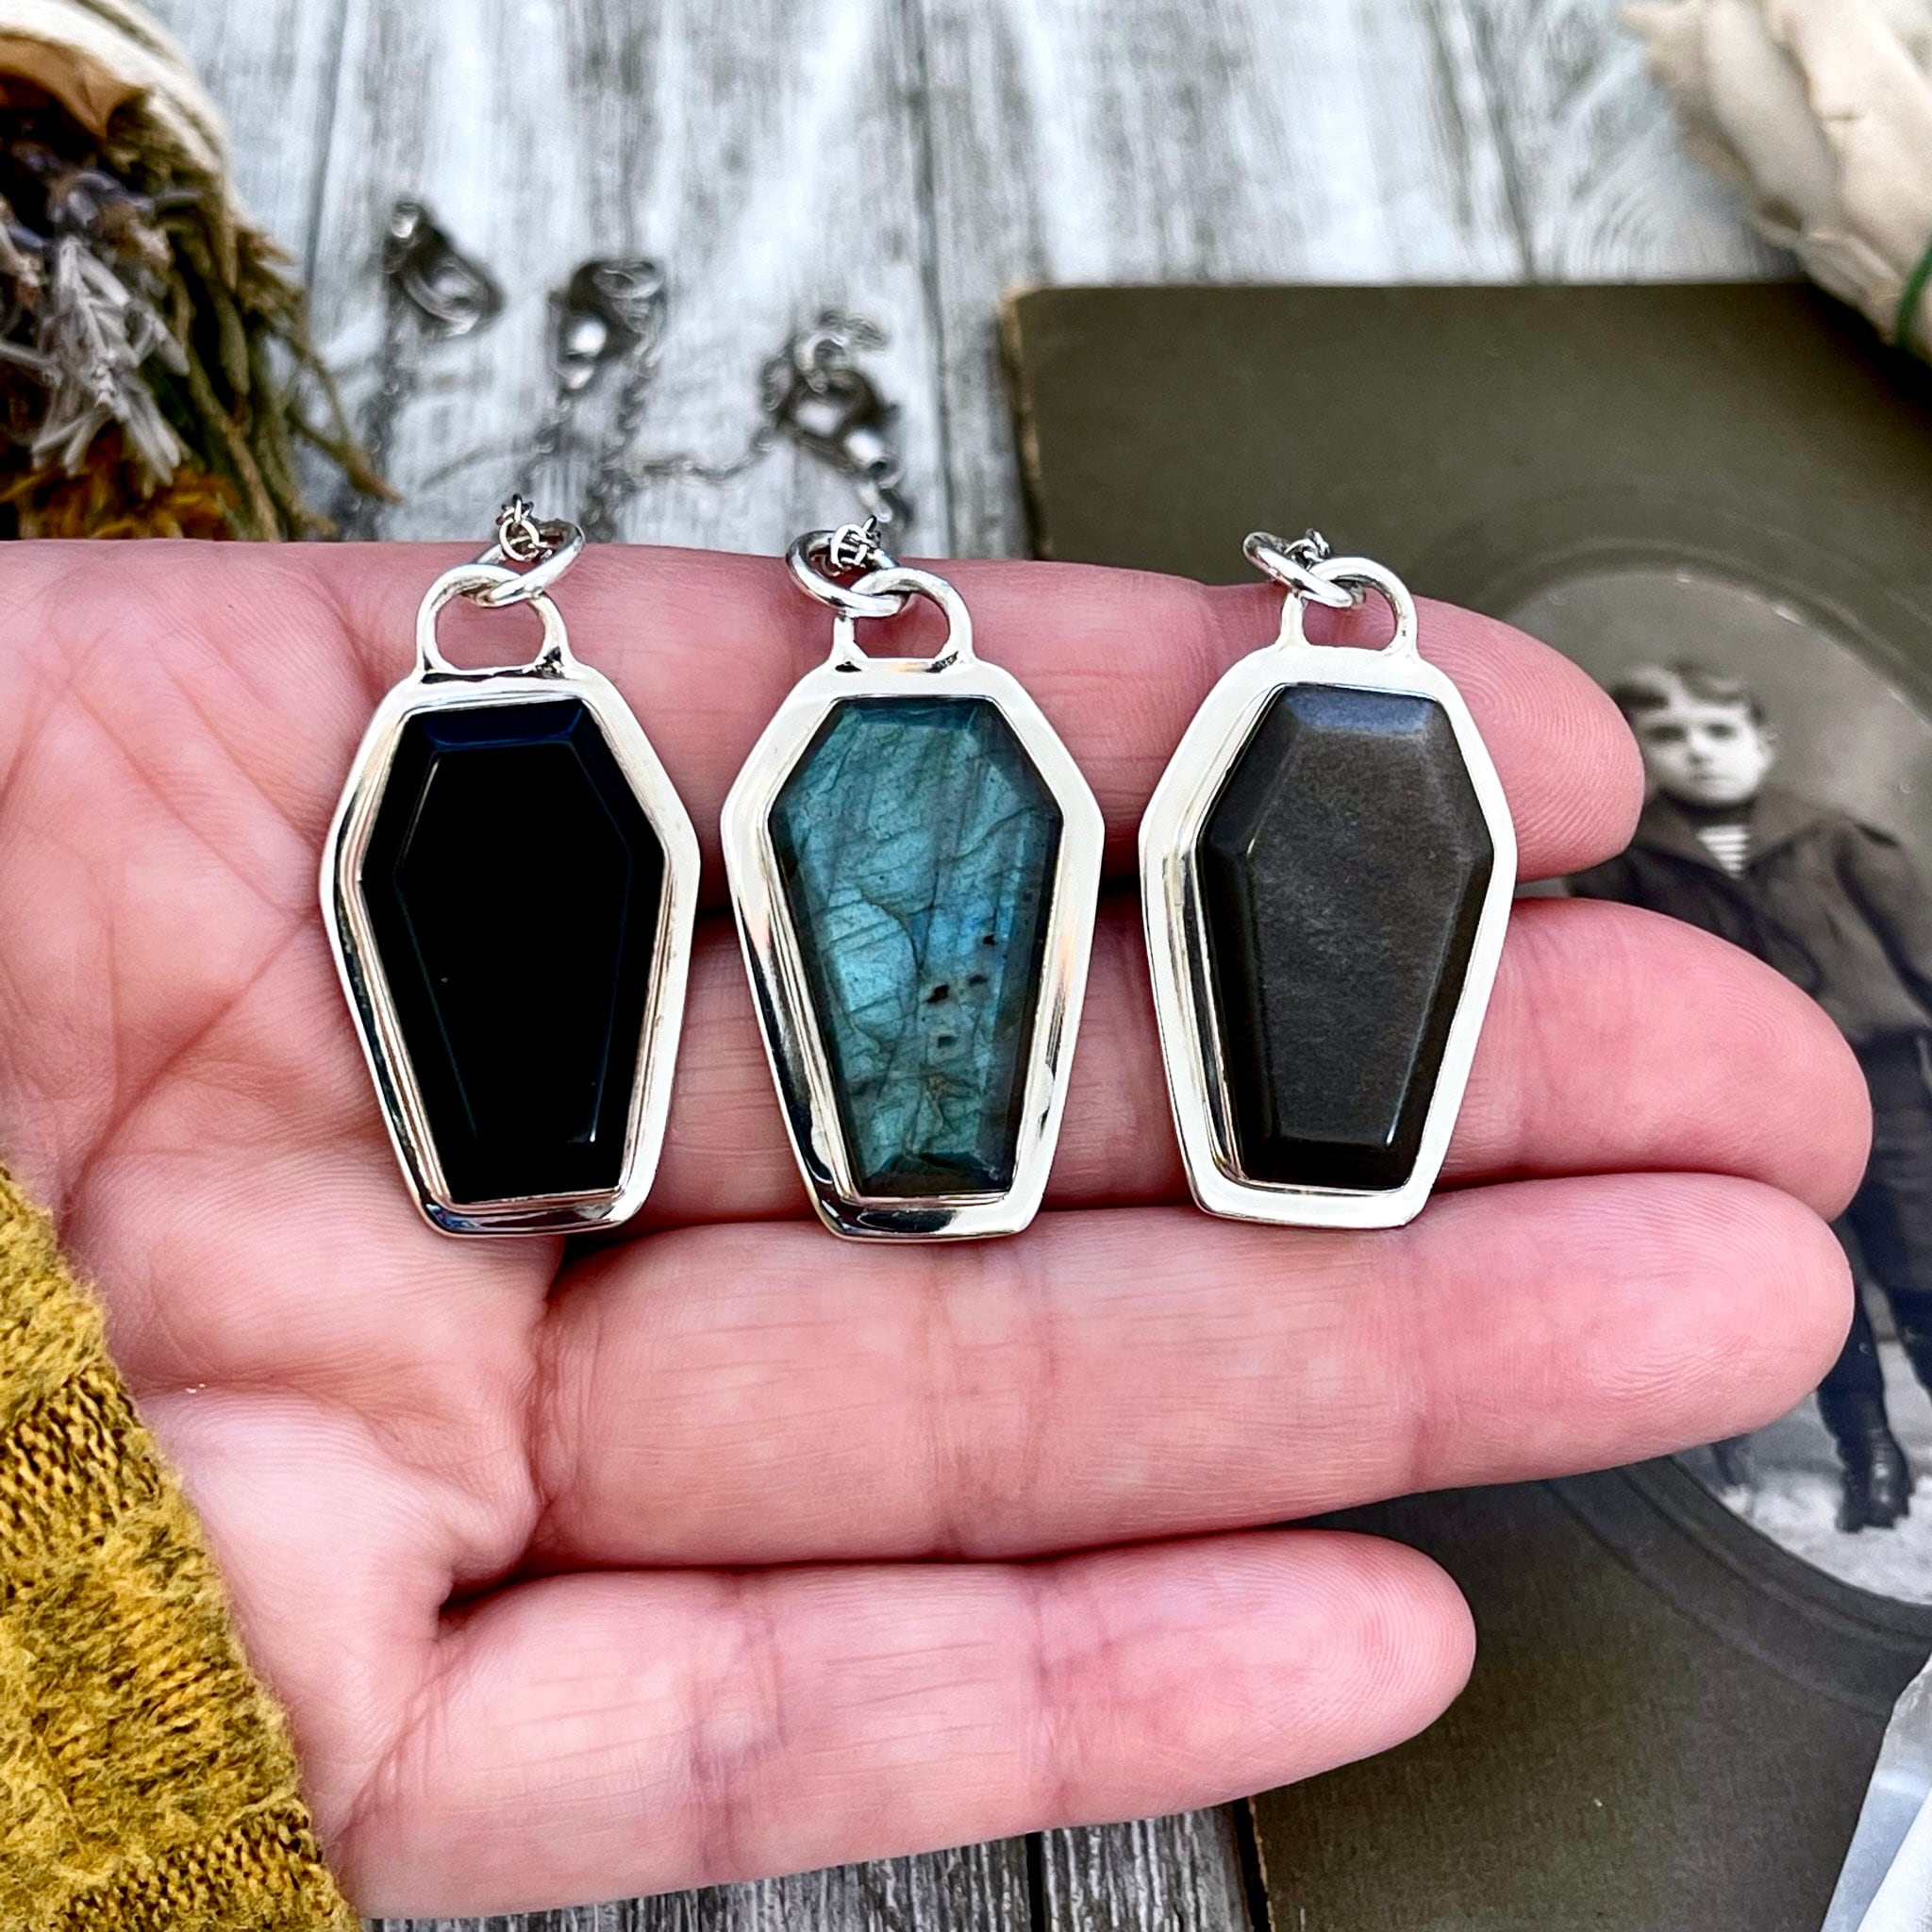 Crystal Coffin Necklace in Sterling Silver- Black Onyx, Labradorite or